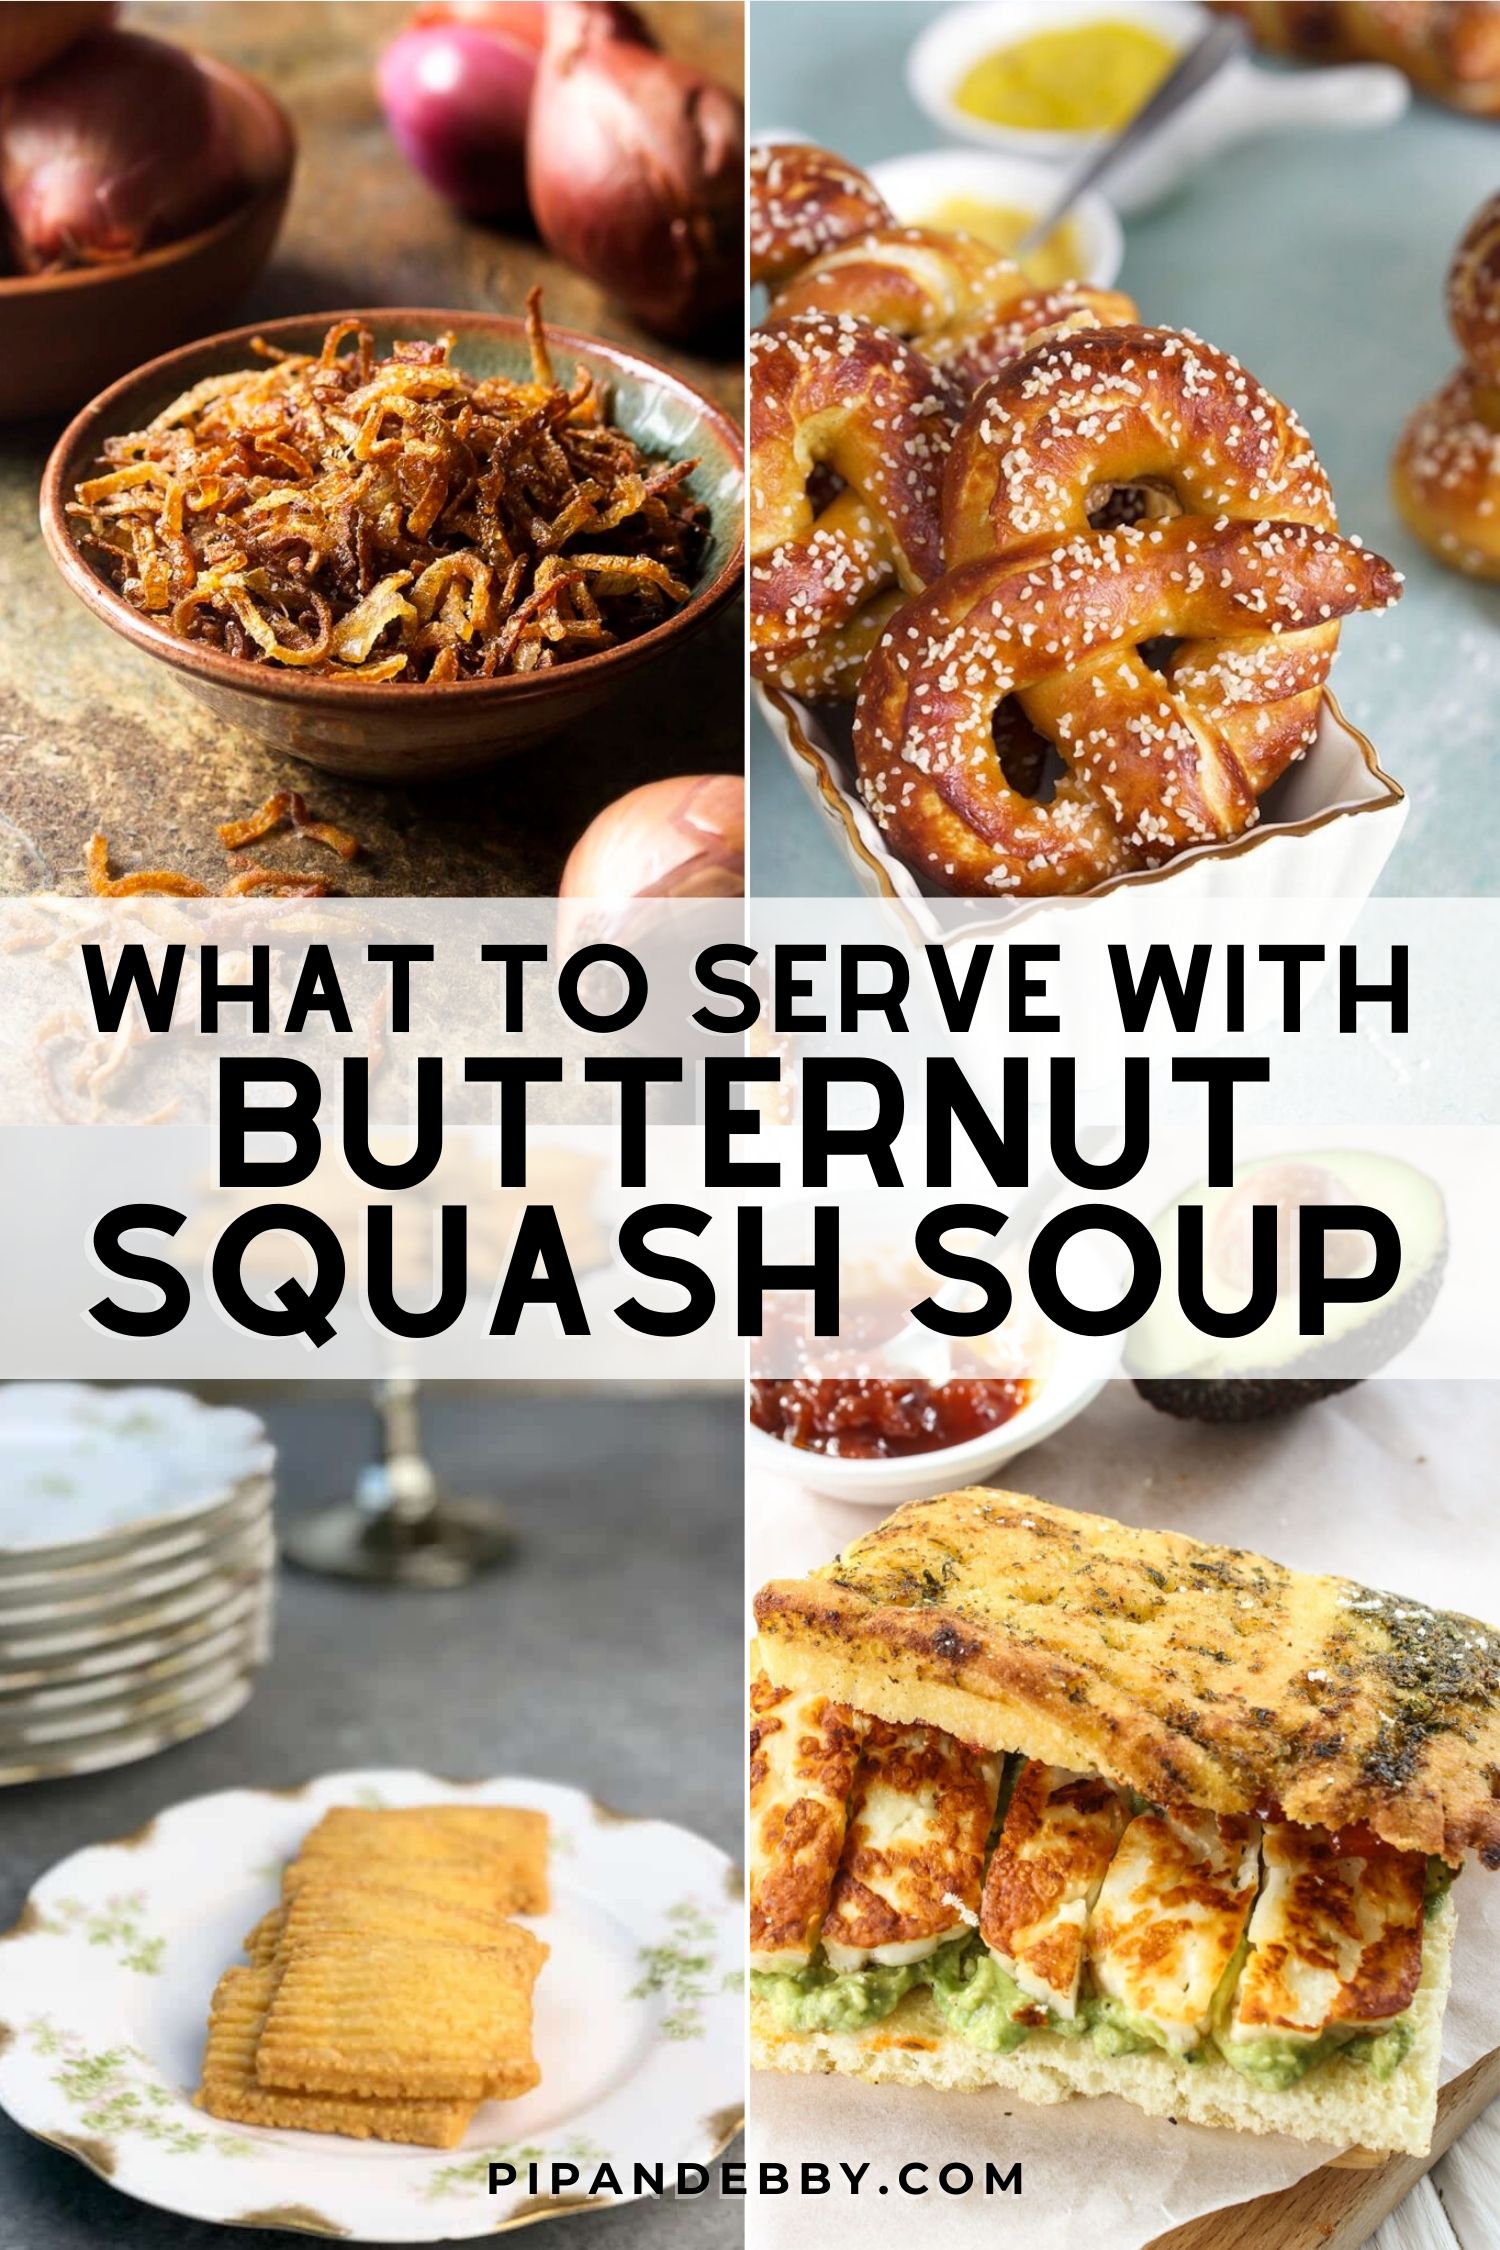 Four food photos in a grid with text overlay reading, "What to serve with butternut squash soup."